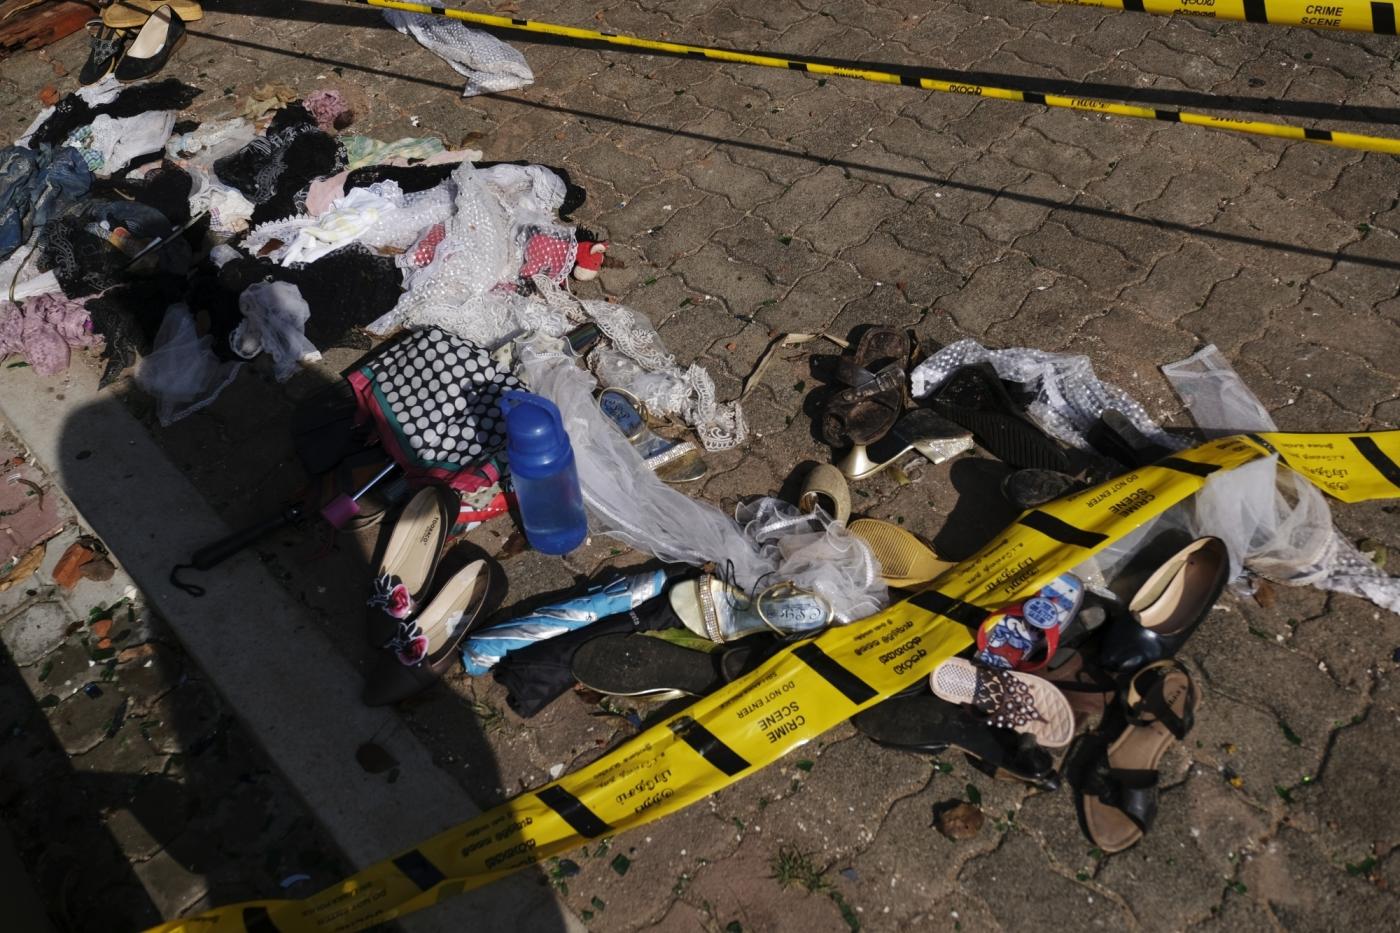 NEGOMBO, April 23, 2019 (Xinhua) -- Personal belongings are seen outside the St. Sebastian's Church where a blast took place in Negombo, north of Colombo, Sri Lanka, April 23, 2019. The explosions which rocked Sri Lanka Sunday killed more than 300 people and injured over 500 others. (Xinhua/Wang Shen/IANS) by . 